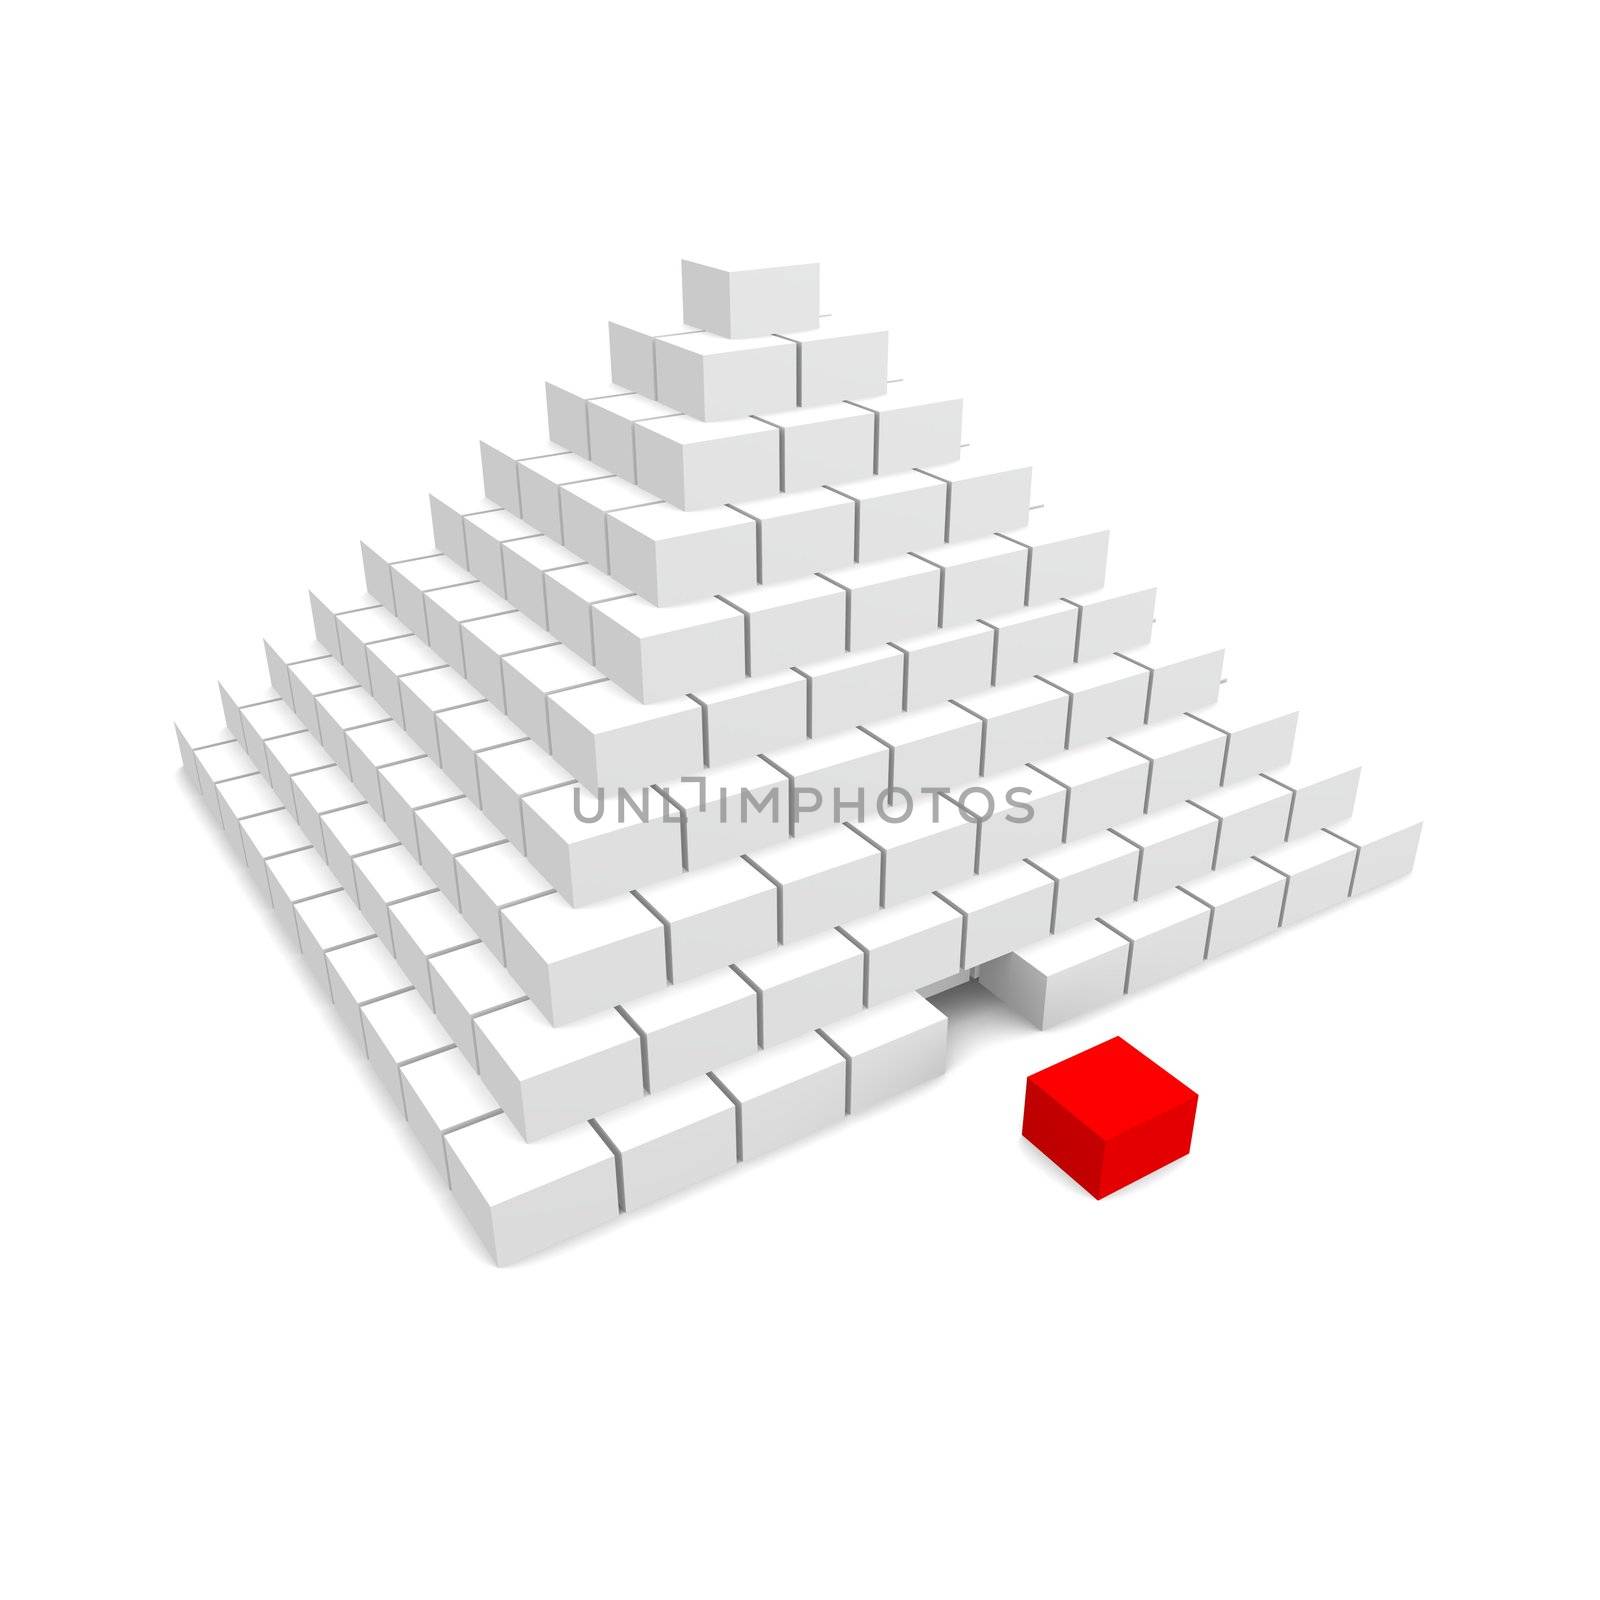 Pyramid with missing block. 3d rendered image.